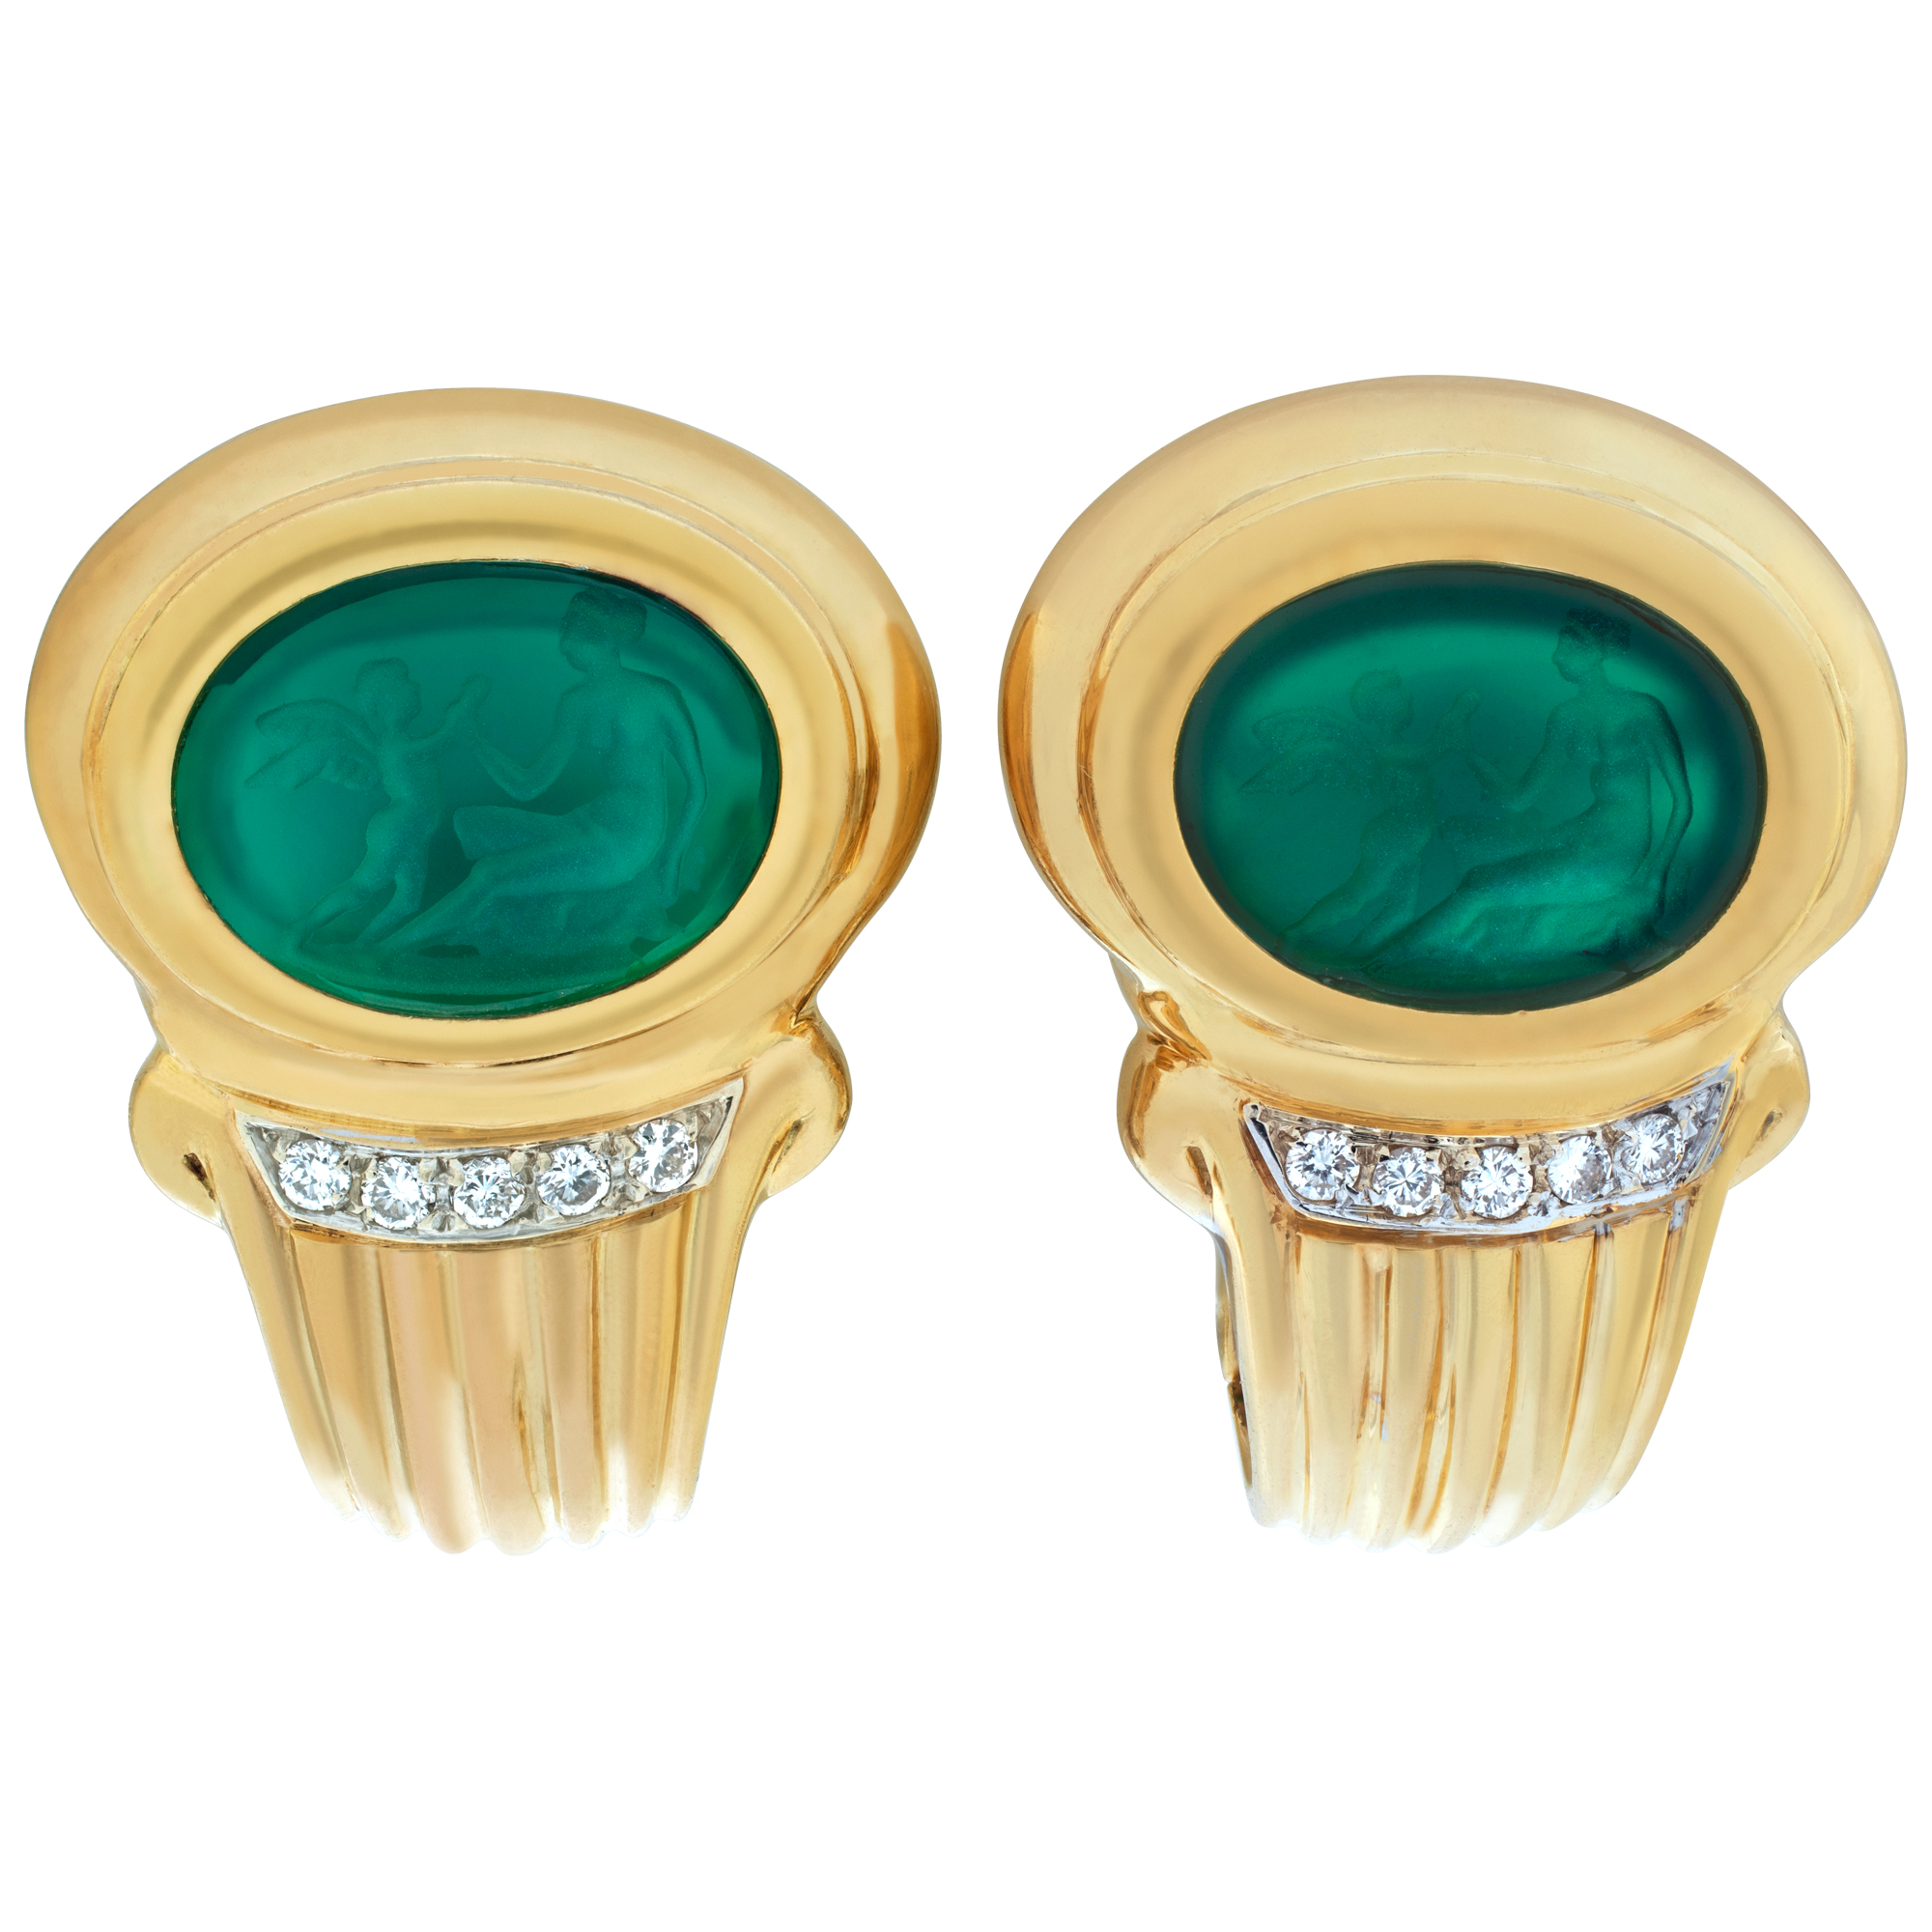 18k earrings with diamonds and carved green stone